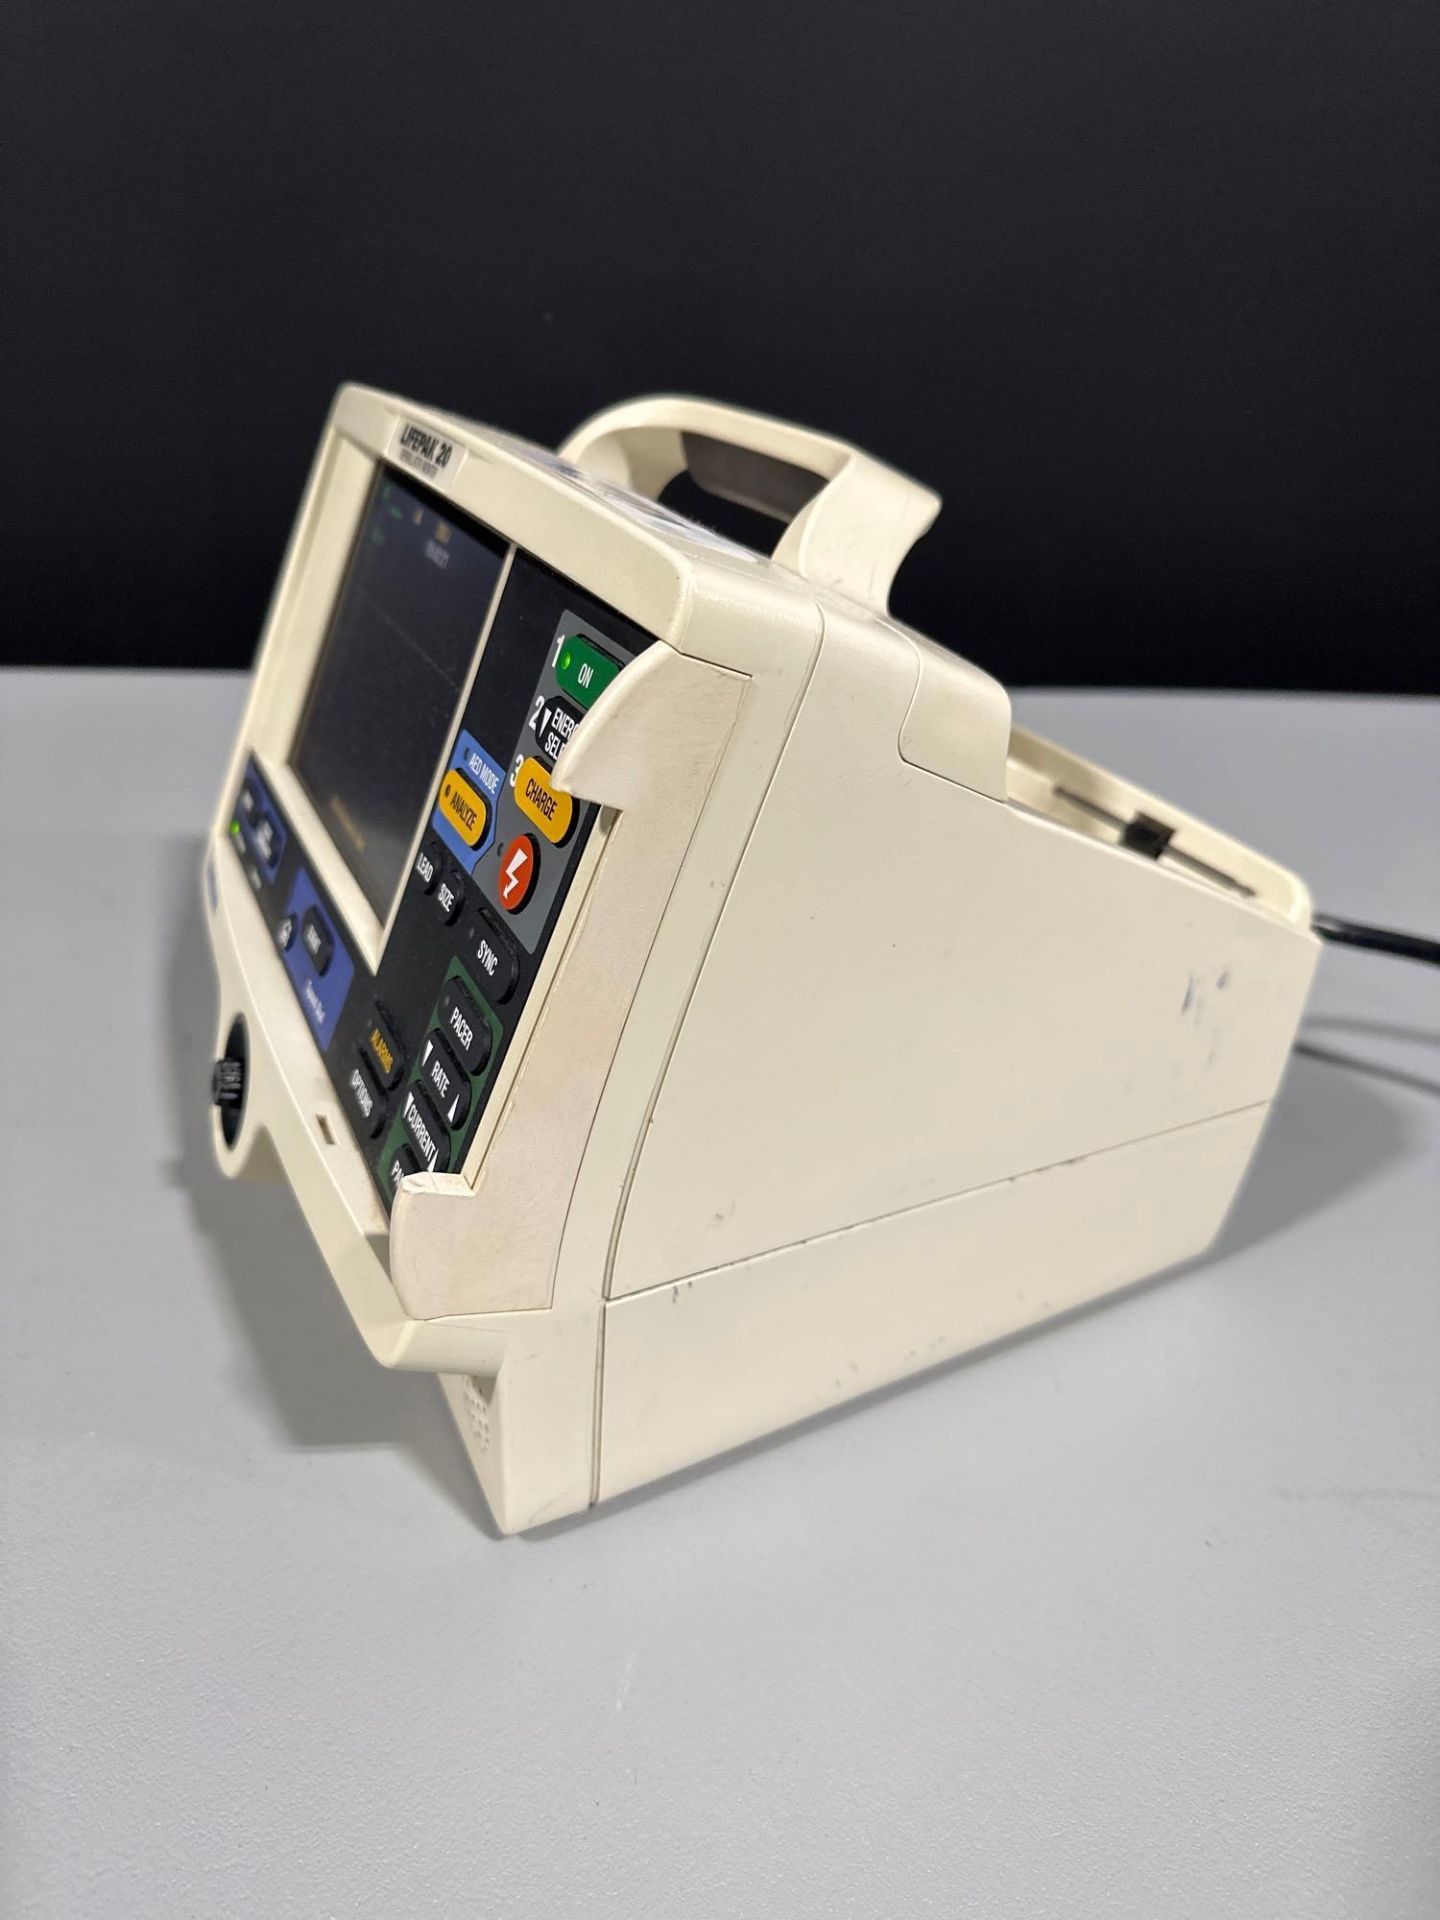 MEDTRONIC/PHYSIO CONTROL LIFEPAK 20 DEFIB WITH PACING, 3 LEAD ECG, ANALYZE (AED MODE) - Image 4 of 8